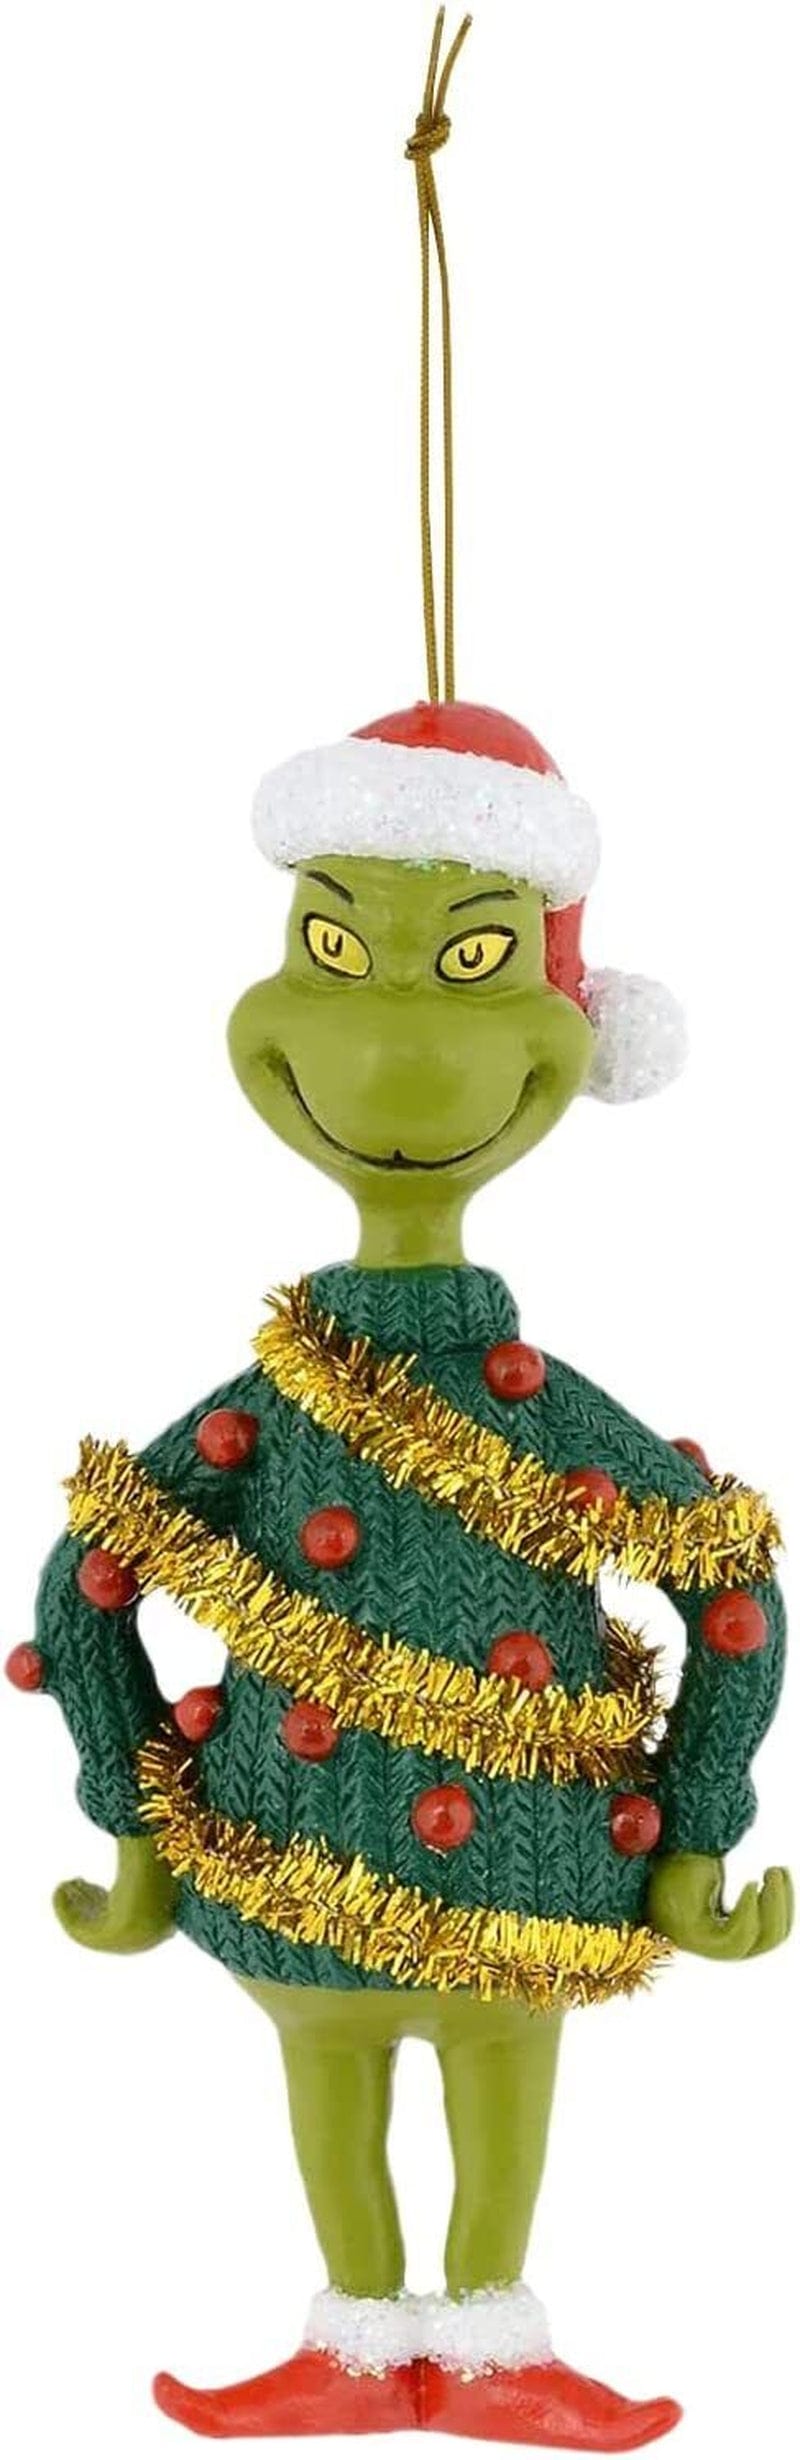 Christmas Grinch Ornaments,Grinch Stole Christmas,Grinch Decorations for Christmas Tree,Merry Christmas Hanging Decor  BINGPAW